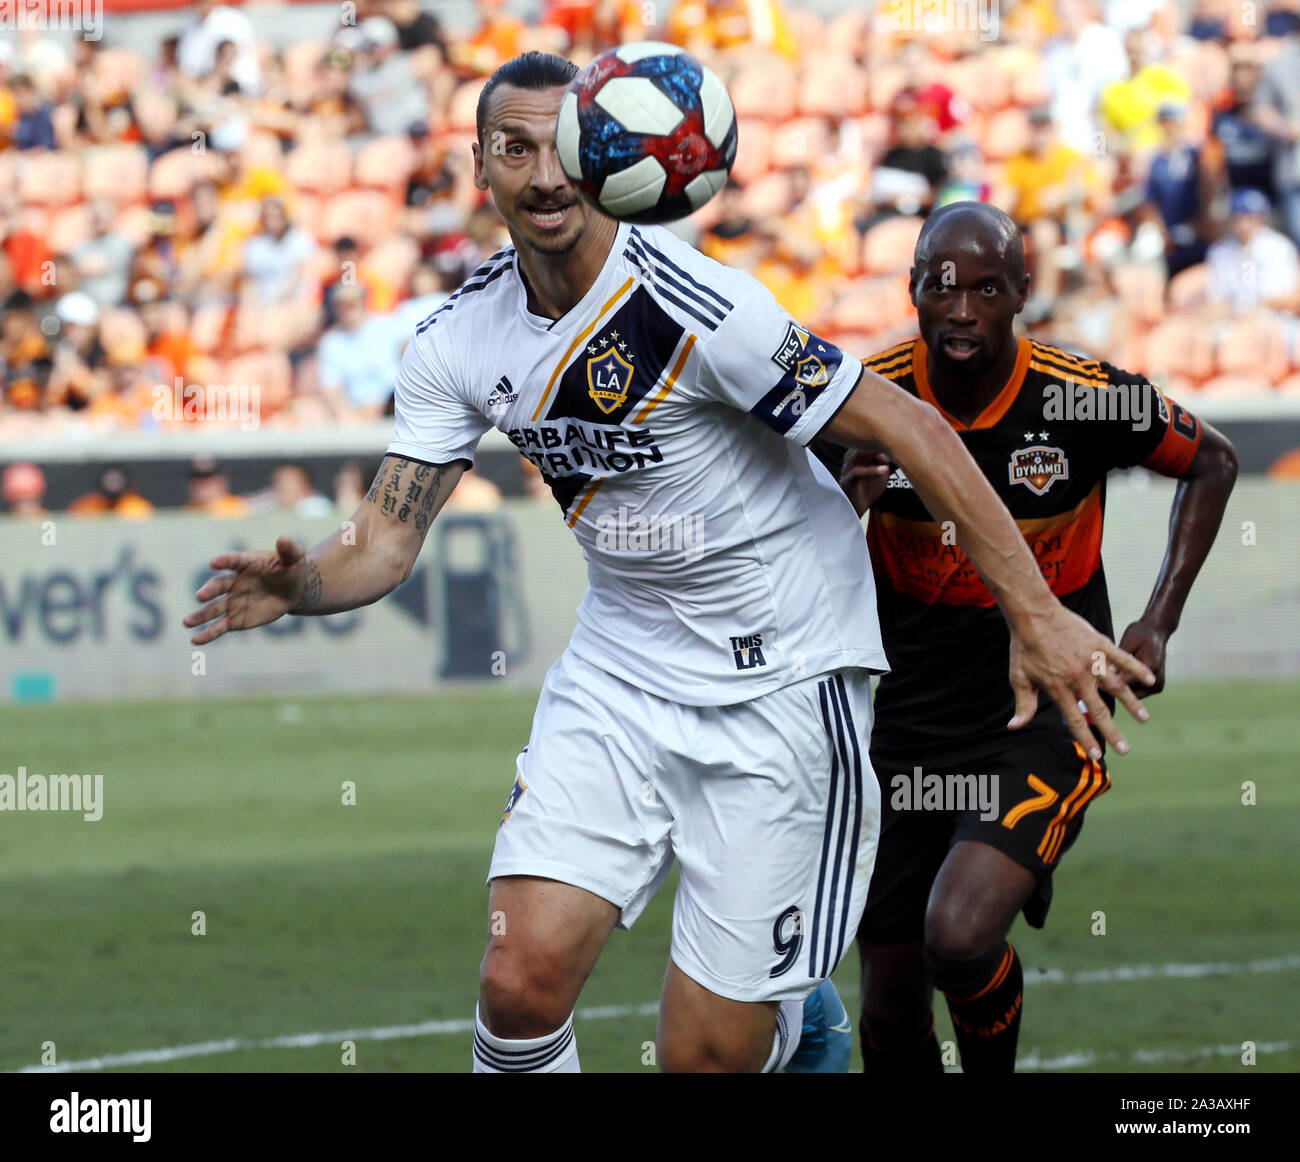 Houston, USA. 6th Oct, 2019. Zlatan Ibrahimovic (L) of LA Galaxy vies with DaMarcus Beasley of Houston during their 2019 Major League Soccer (MLS) match at BMO Field in Houston, the United States, Oct. 6, 2019. Credit: Steven Song/Xinhua/Alamy Live News Stock Photo